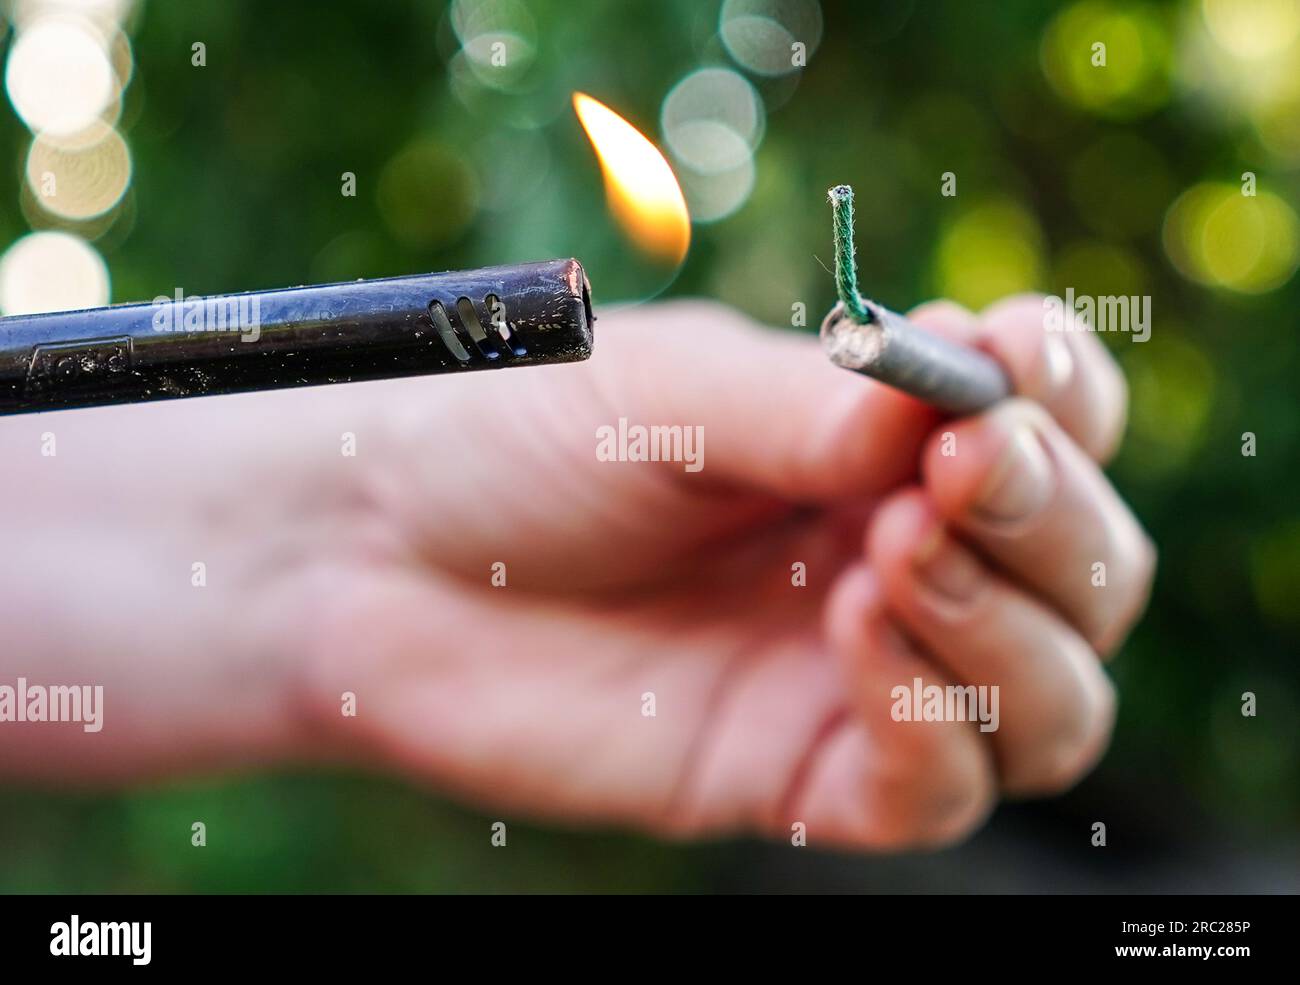 Person fire up firecracker. Person holding lighter and firecracker. Shooting firecrackers and fireworks. Stock Photo